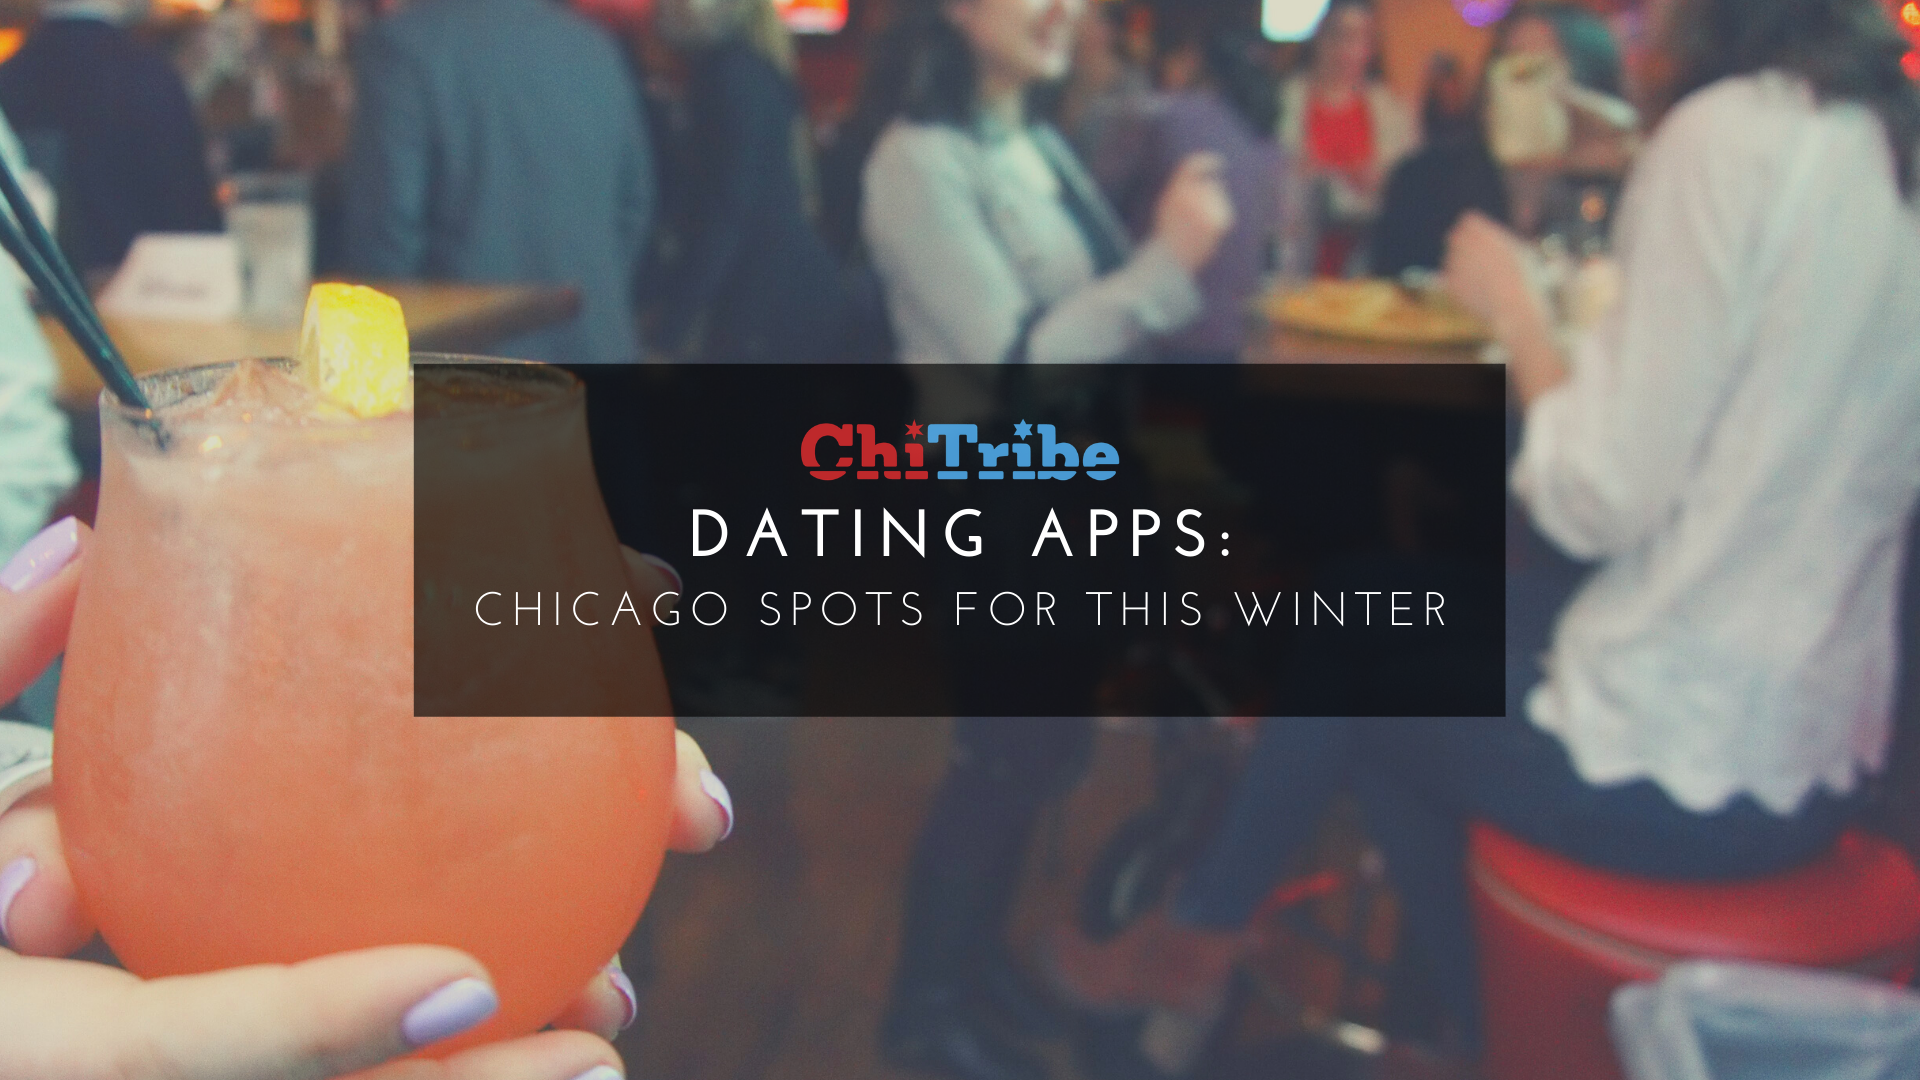 Dating Apps and Chicago Spots for this Winter